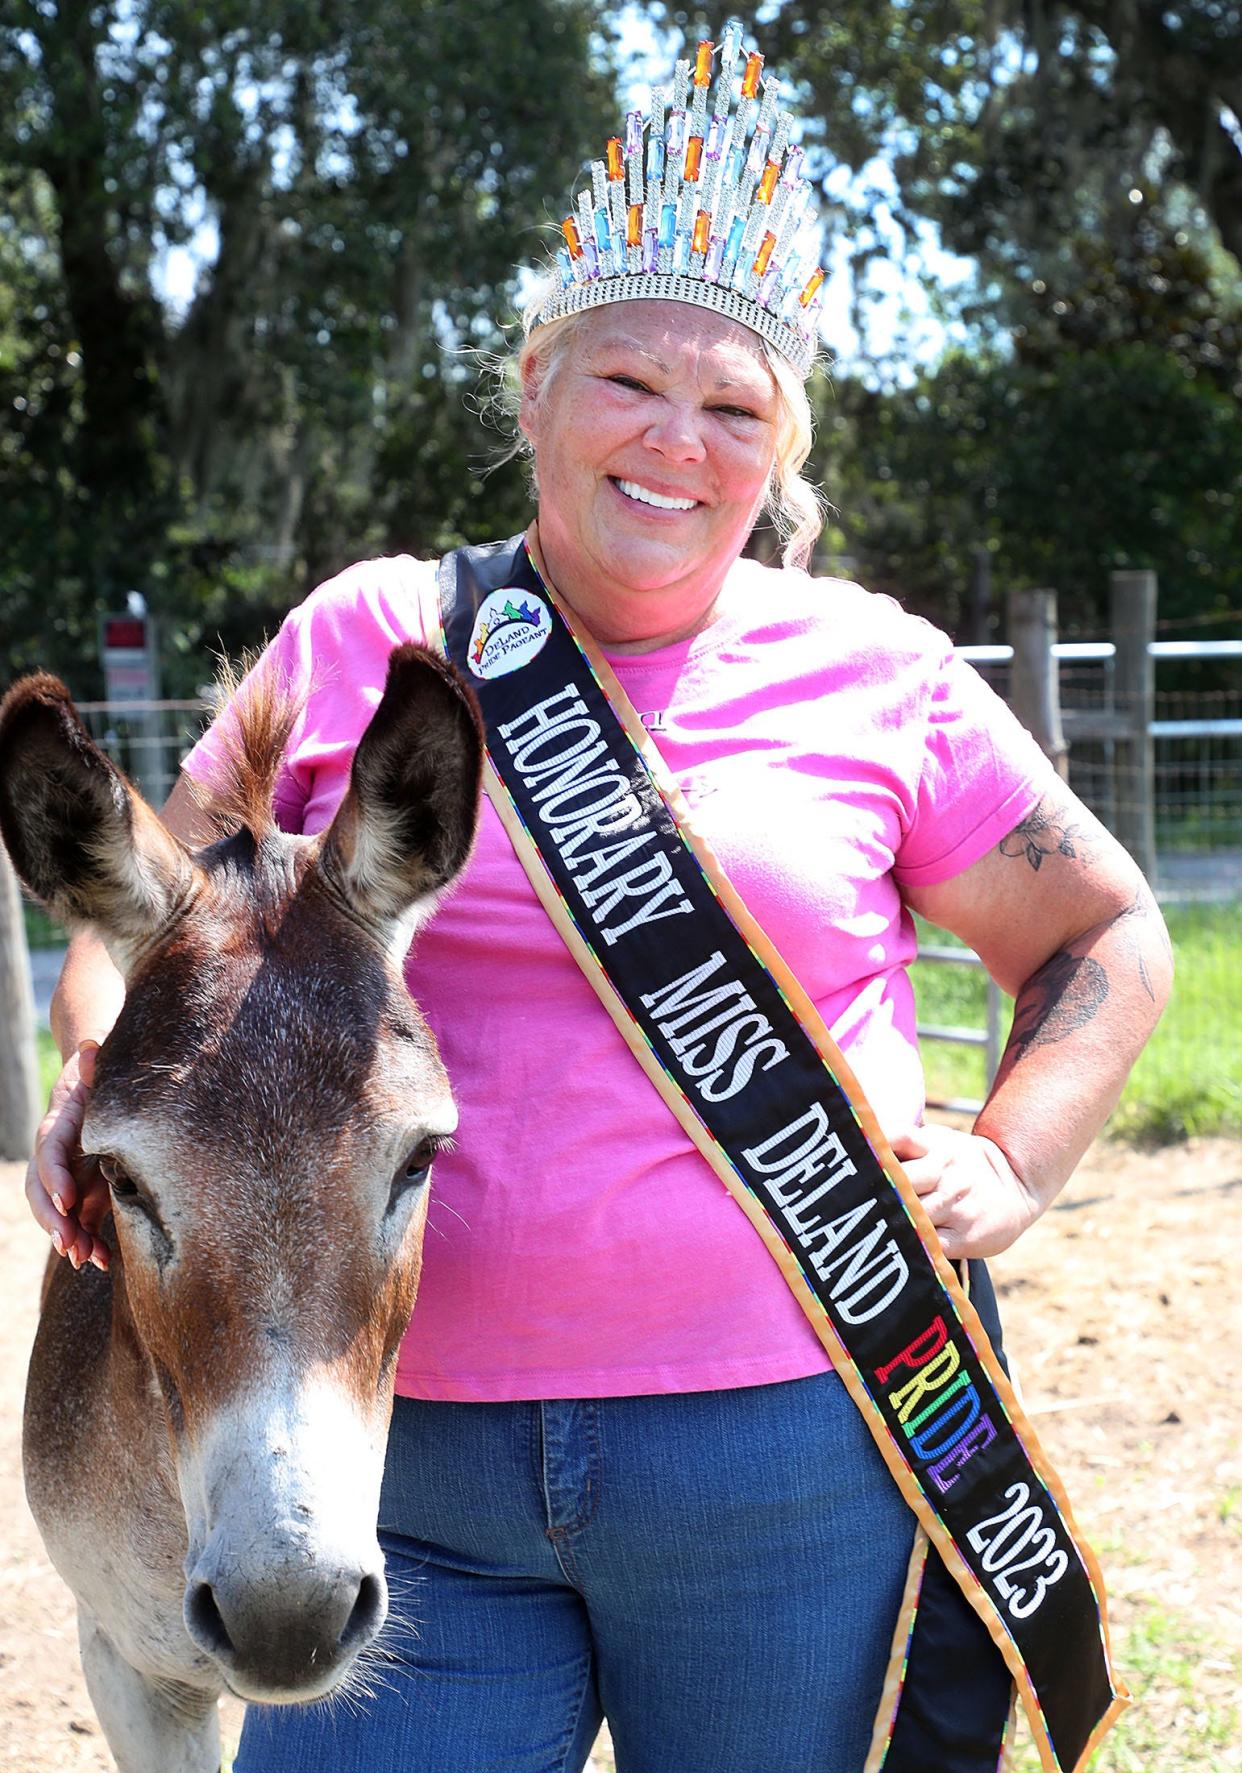 Mary Taylor Green, who was named Honorary Miss DeLand Pride at this year's pageant, poses in her sash and crown alongside her donkey named Roger on her farm, Green Acres, in DeLand, on June 29.